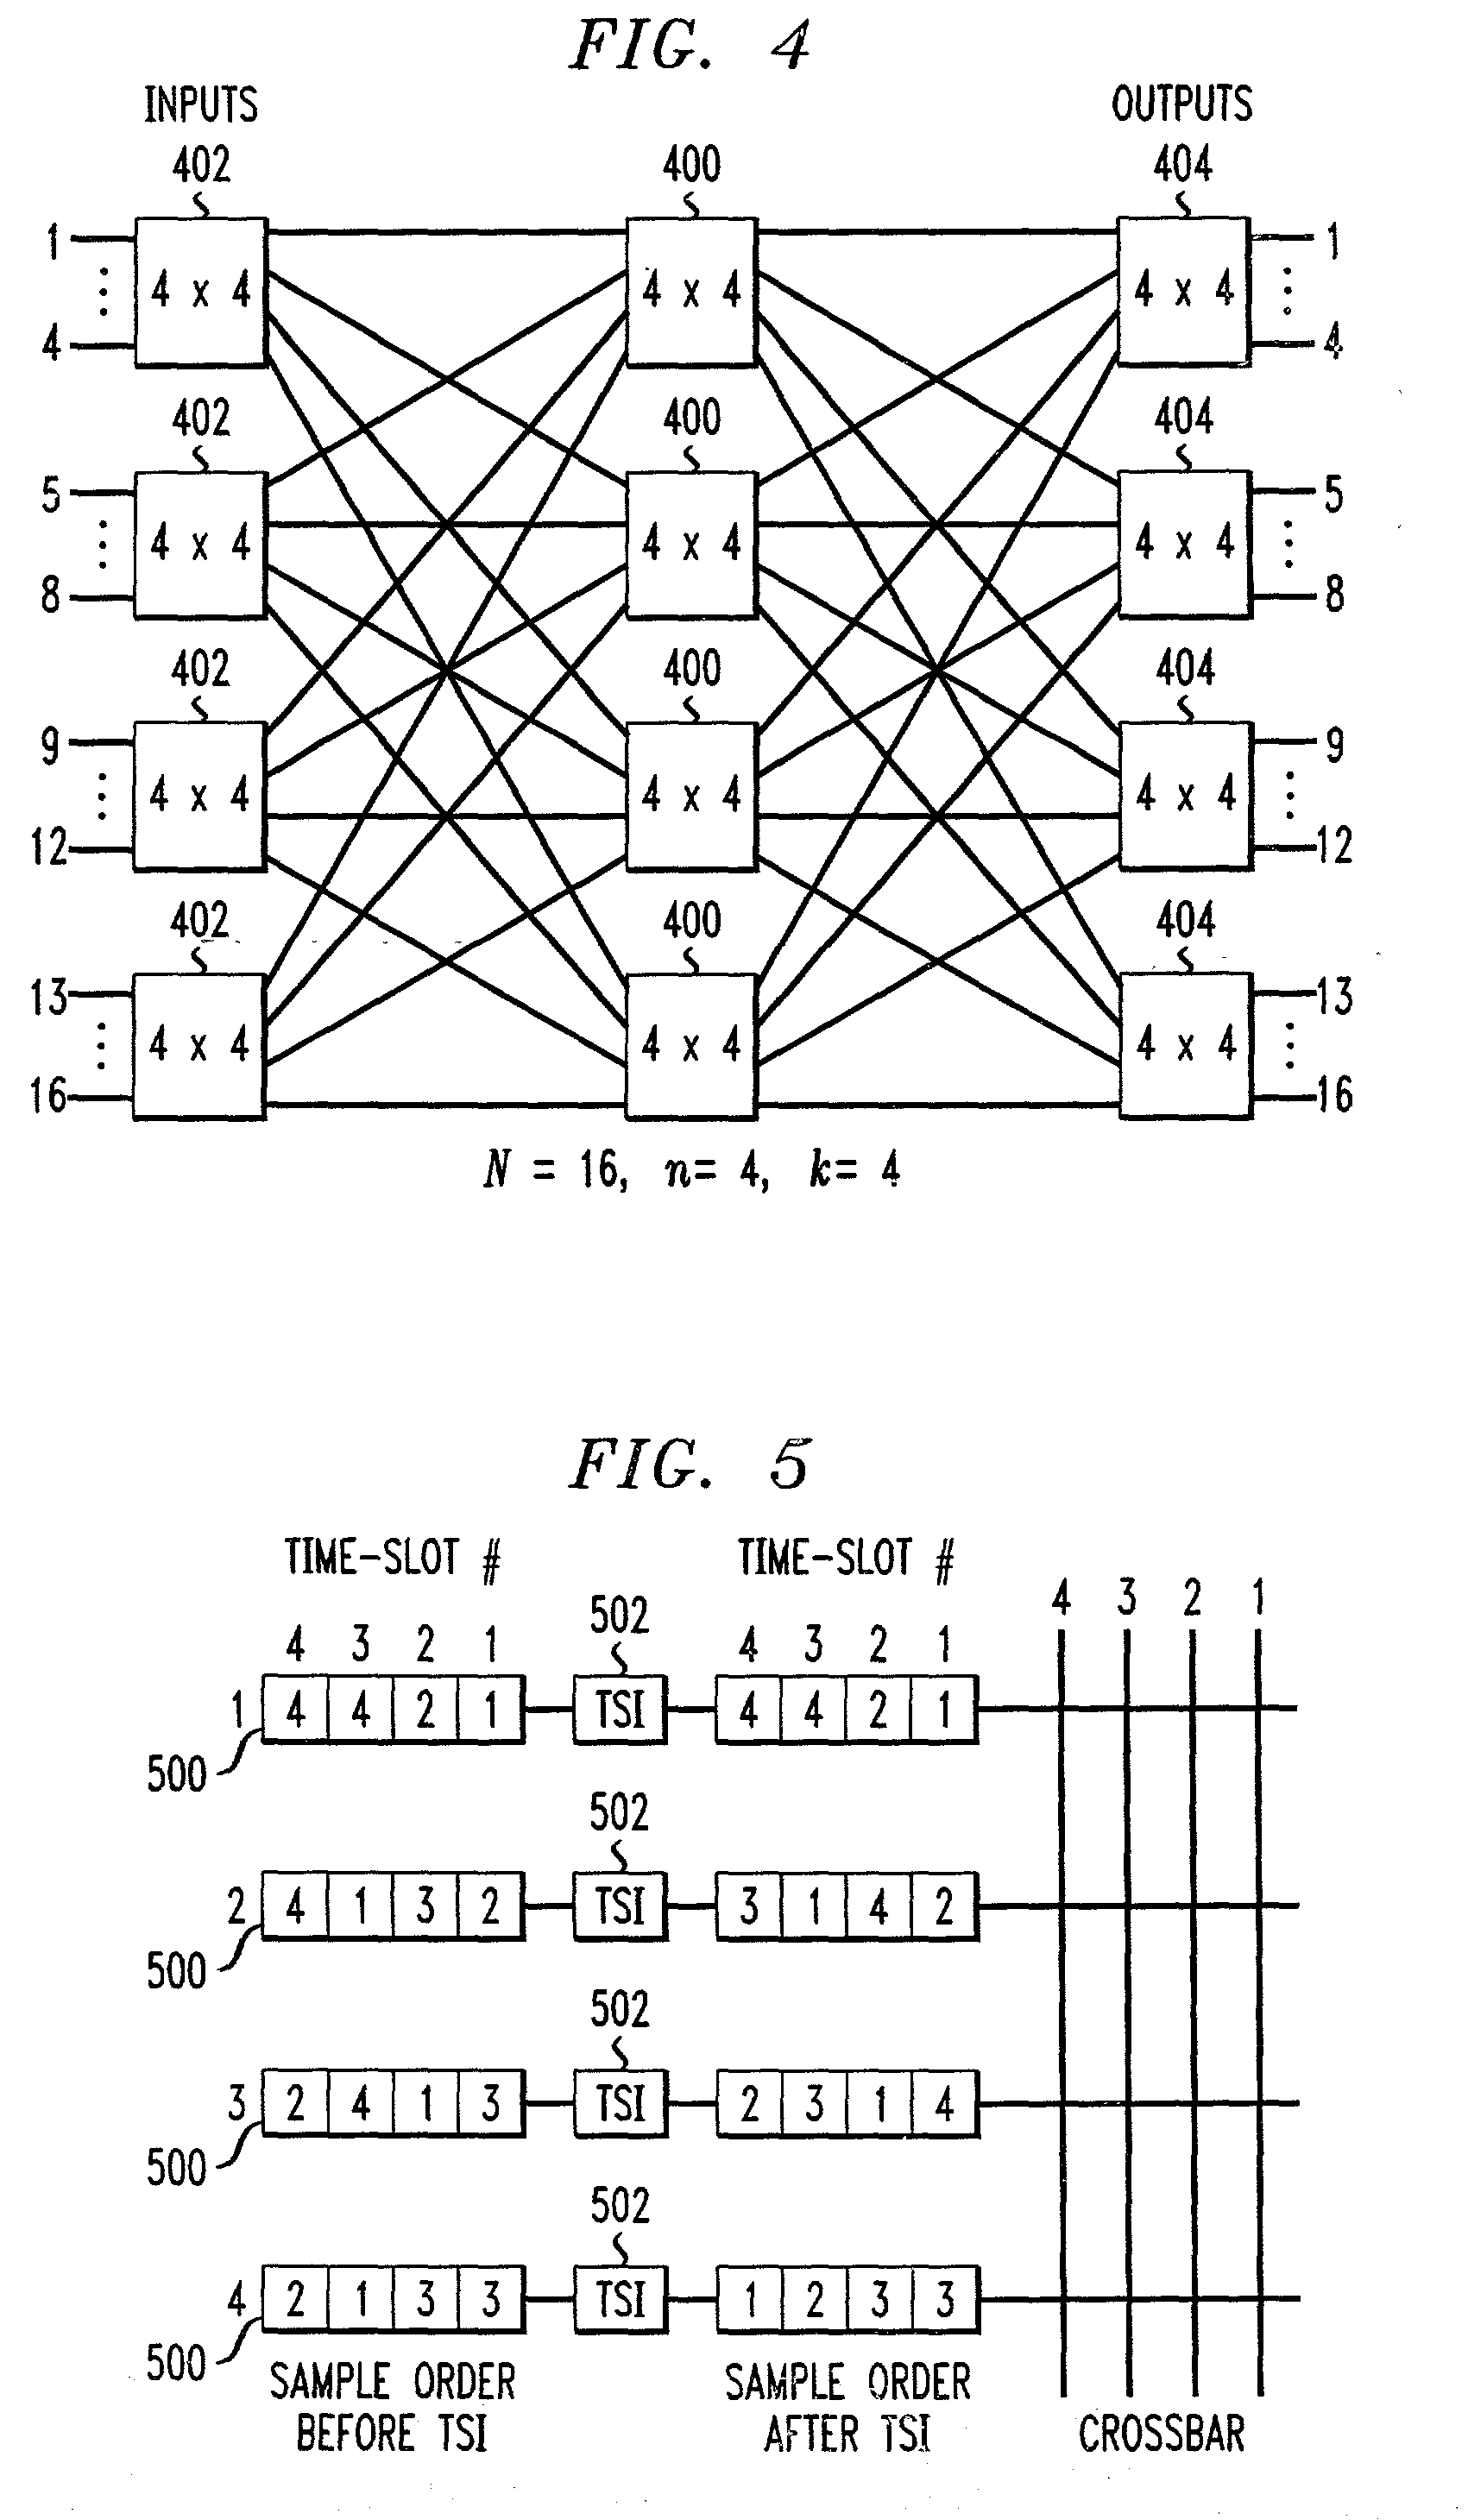 Mesh architecture for synchronous cross-connects